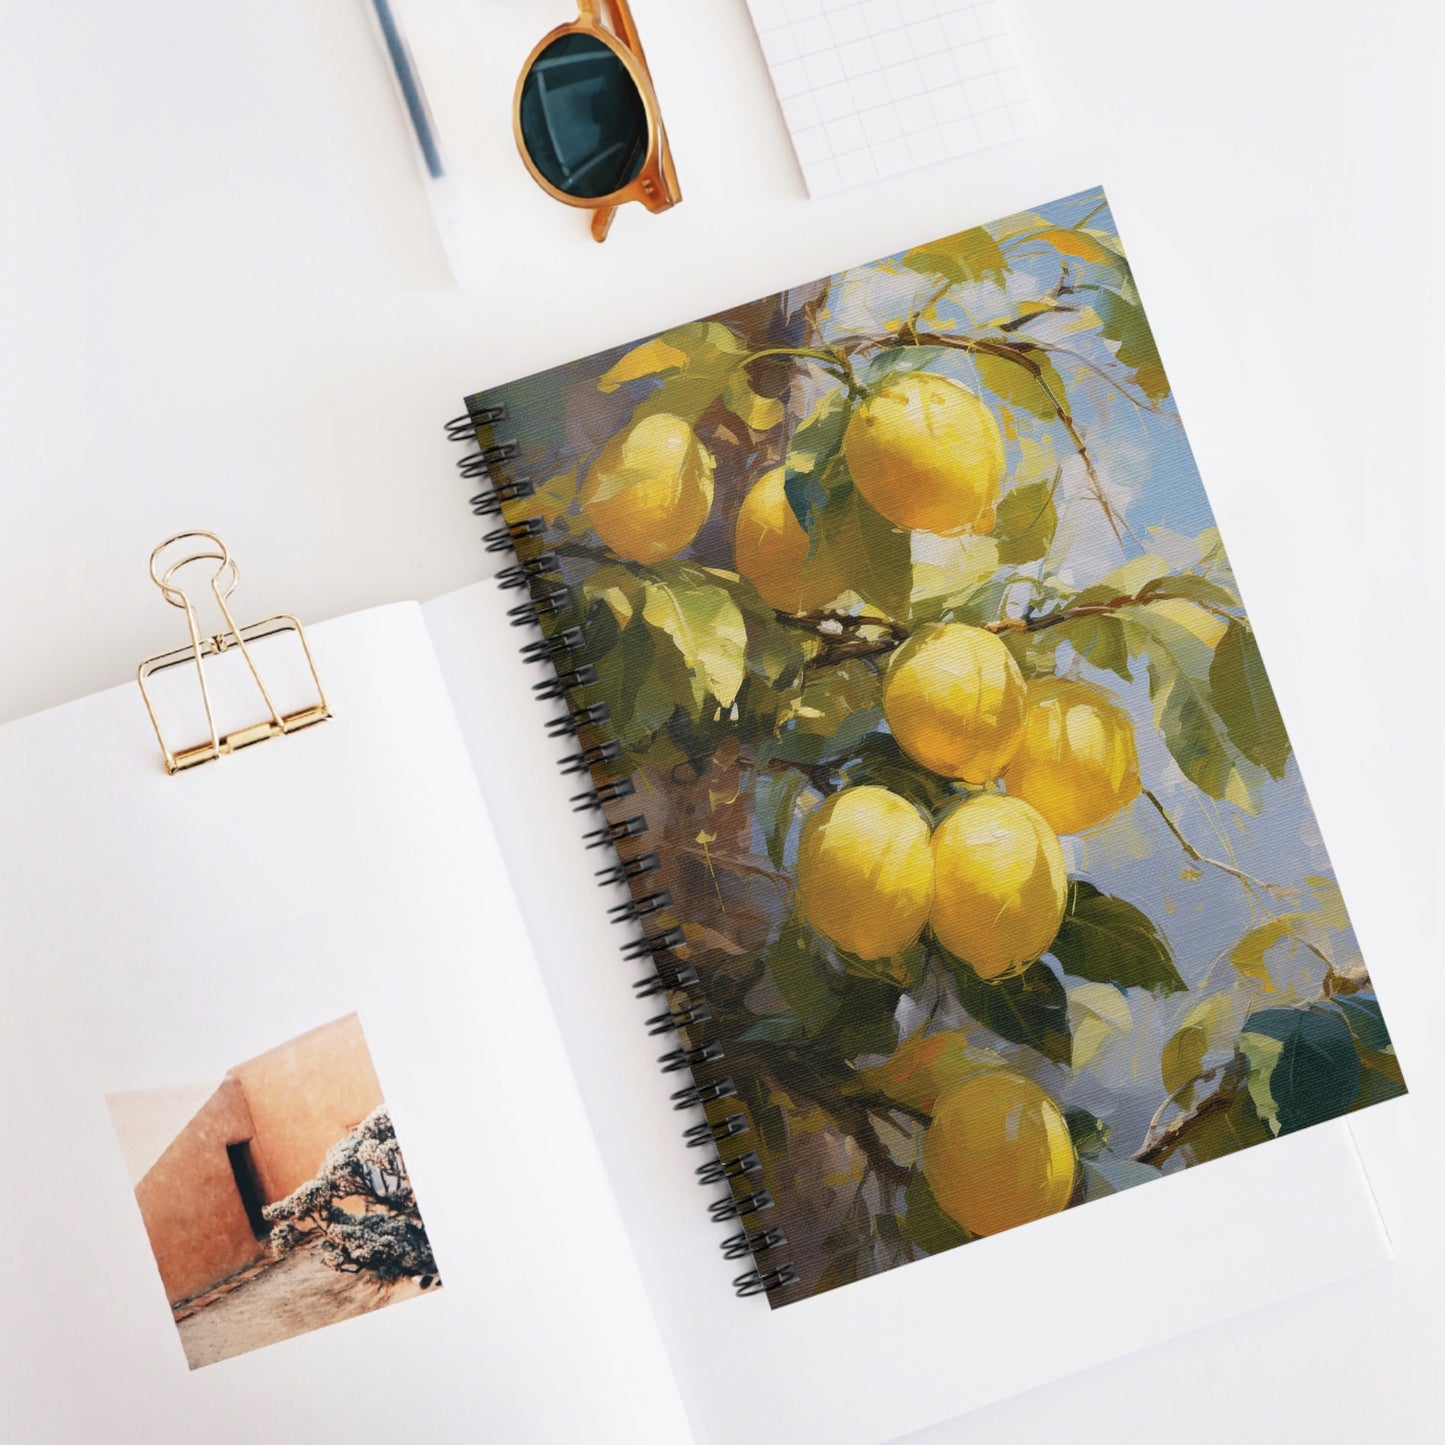 Lemon Art Print Notebook (6) - Composition Notebook, Spiral Notebook, Journal for Writing and Note-Taking